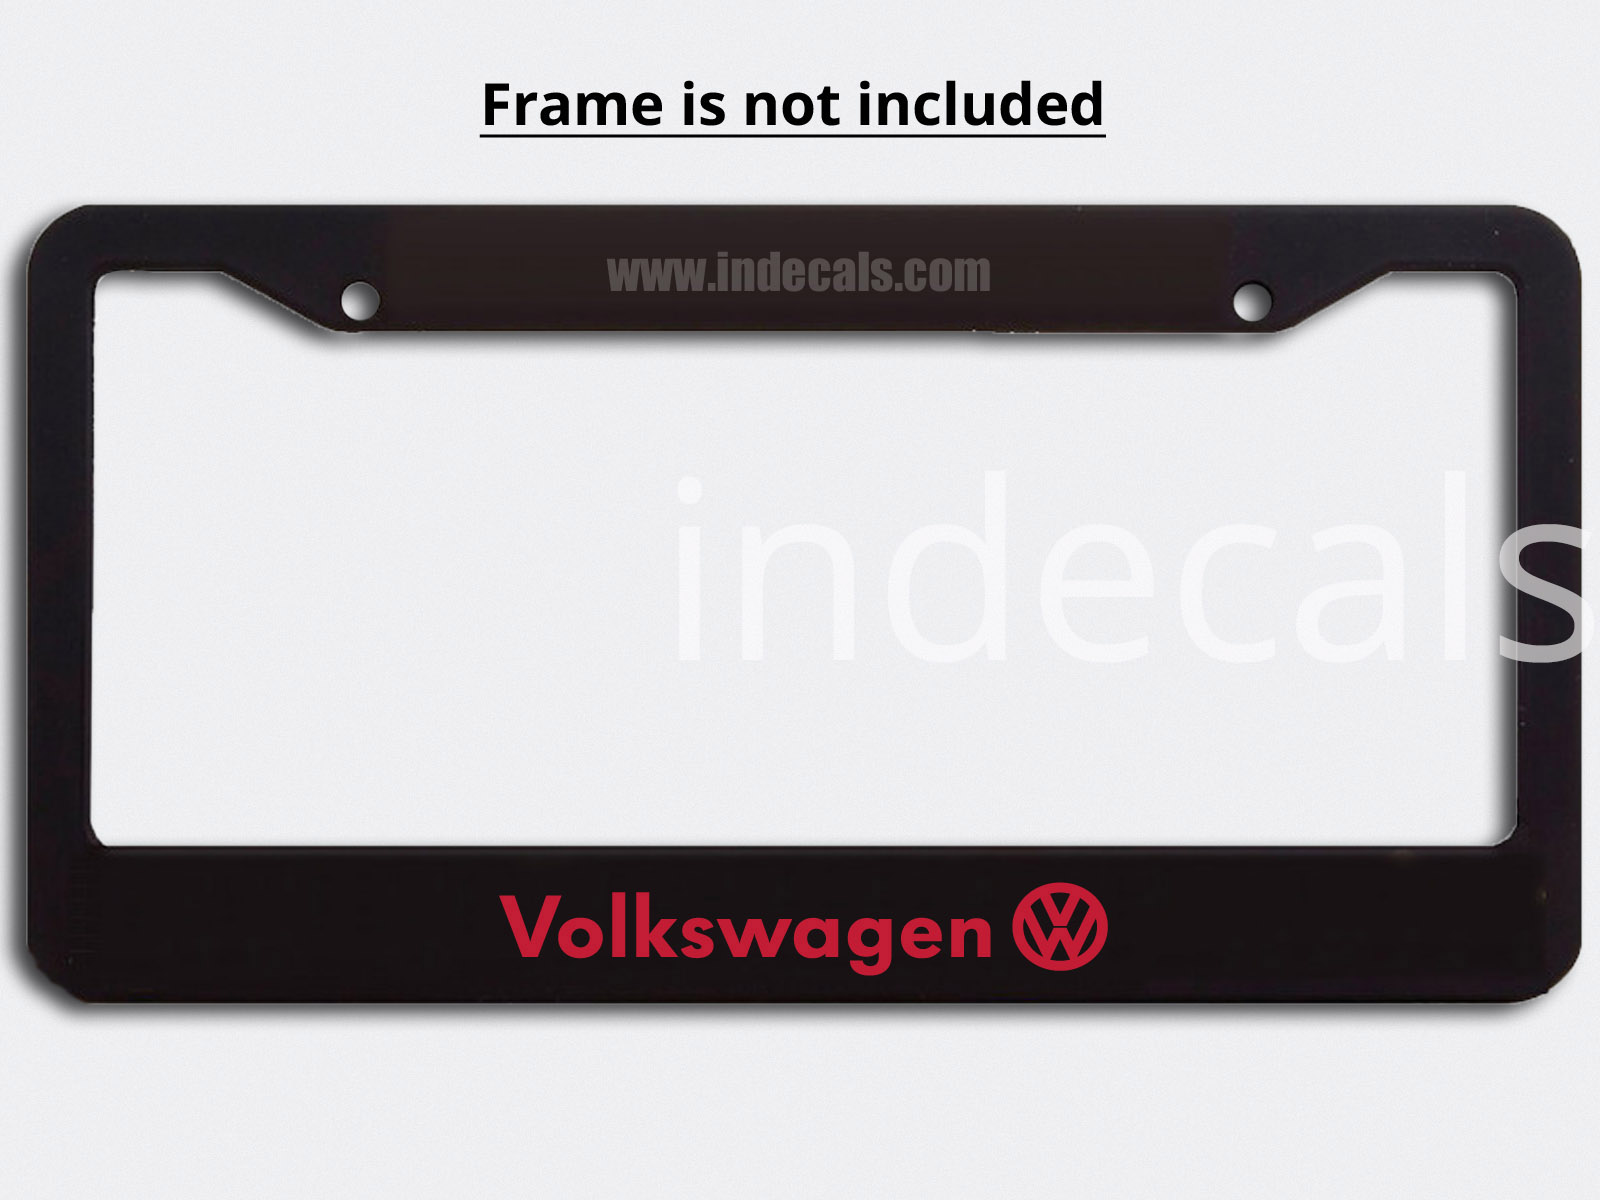 3 x Volkswagen Stickers for Plate Frame - Red